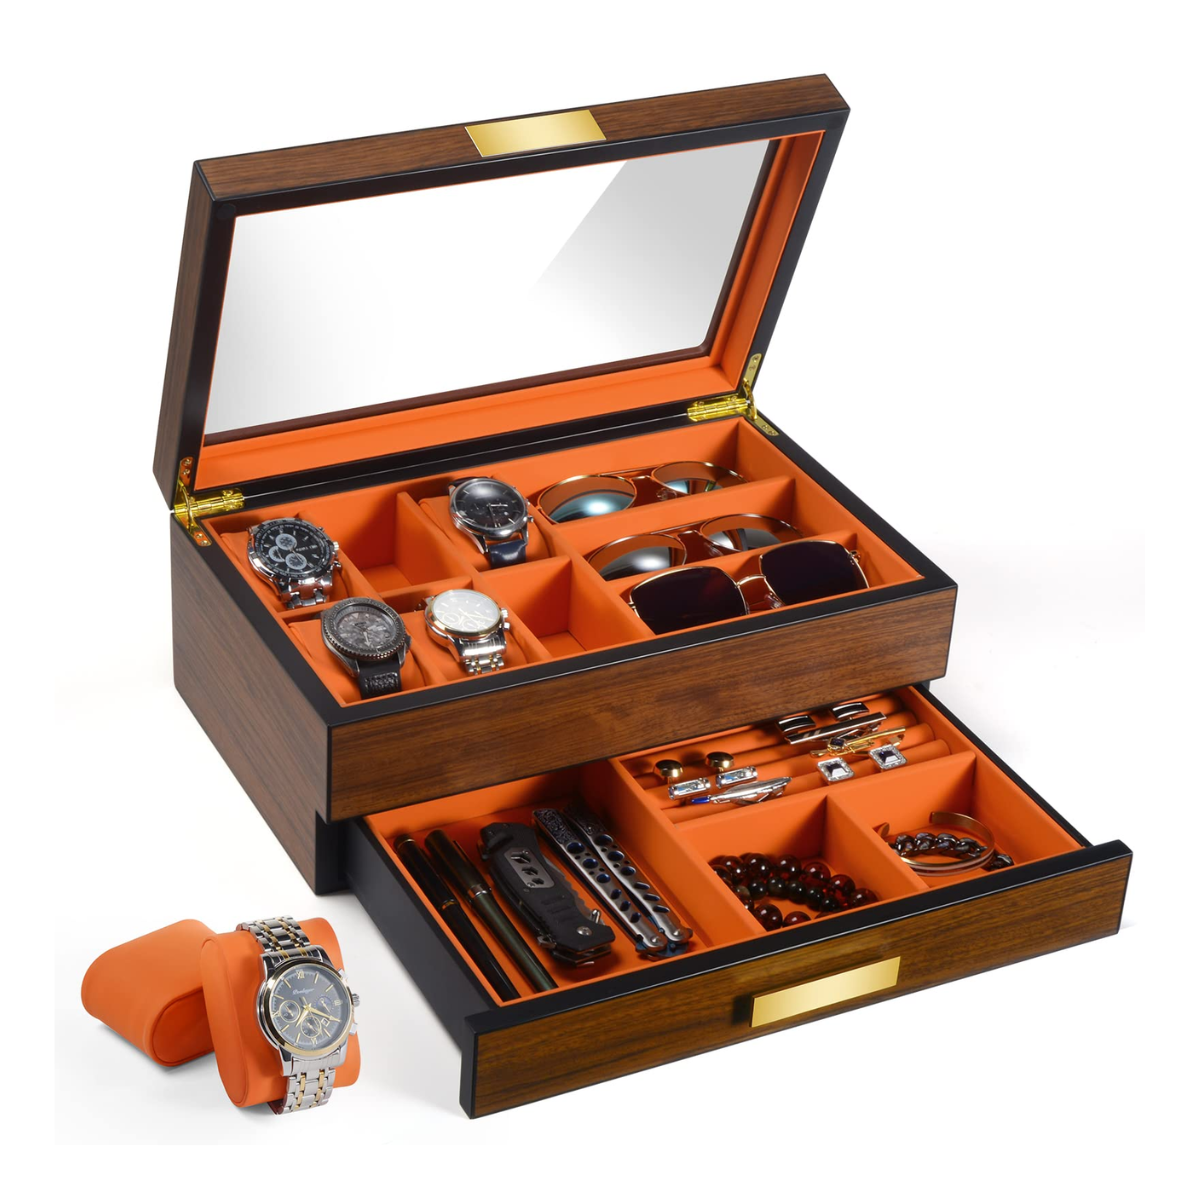 28. Organize His Style: A Unique Wooden Watch and Sunglasses Organizer for the Perfect Anniversary Gift